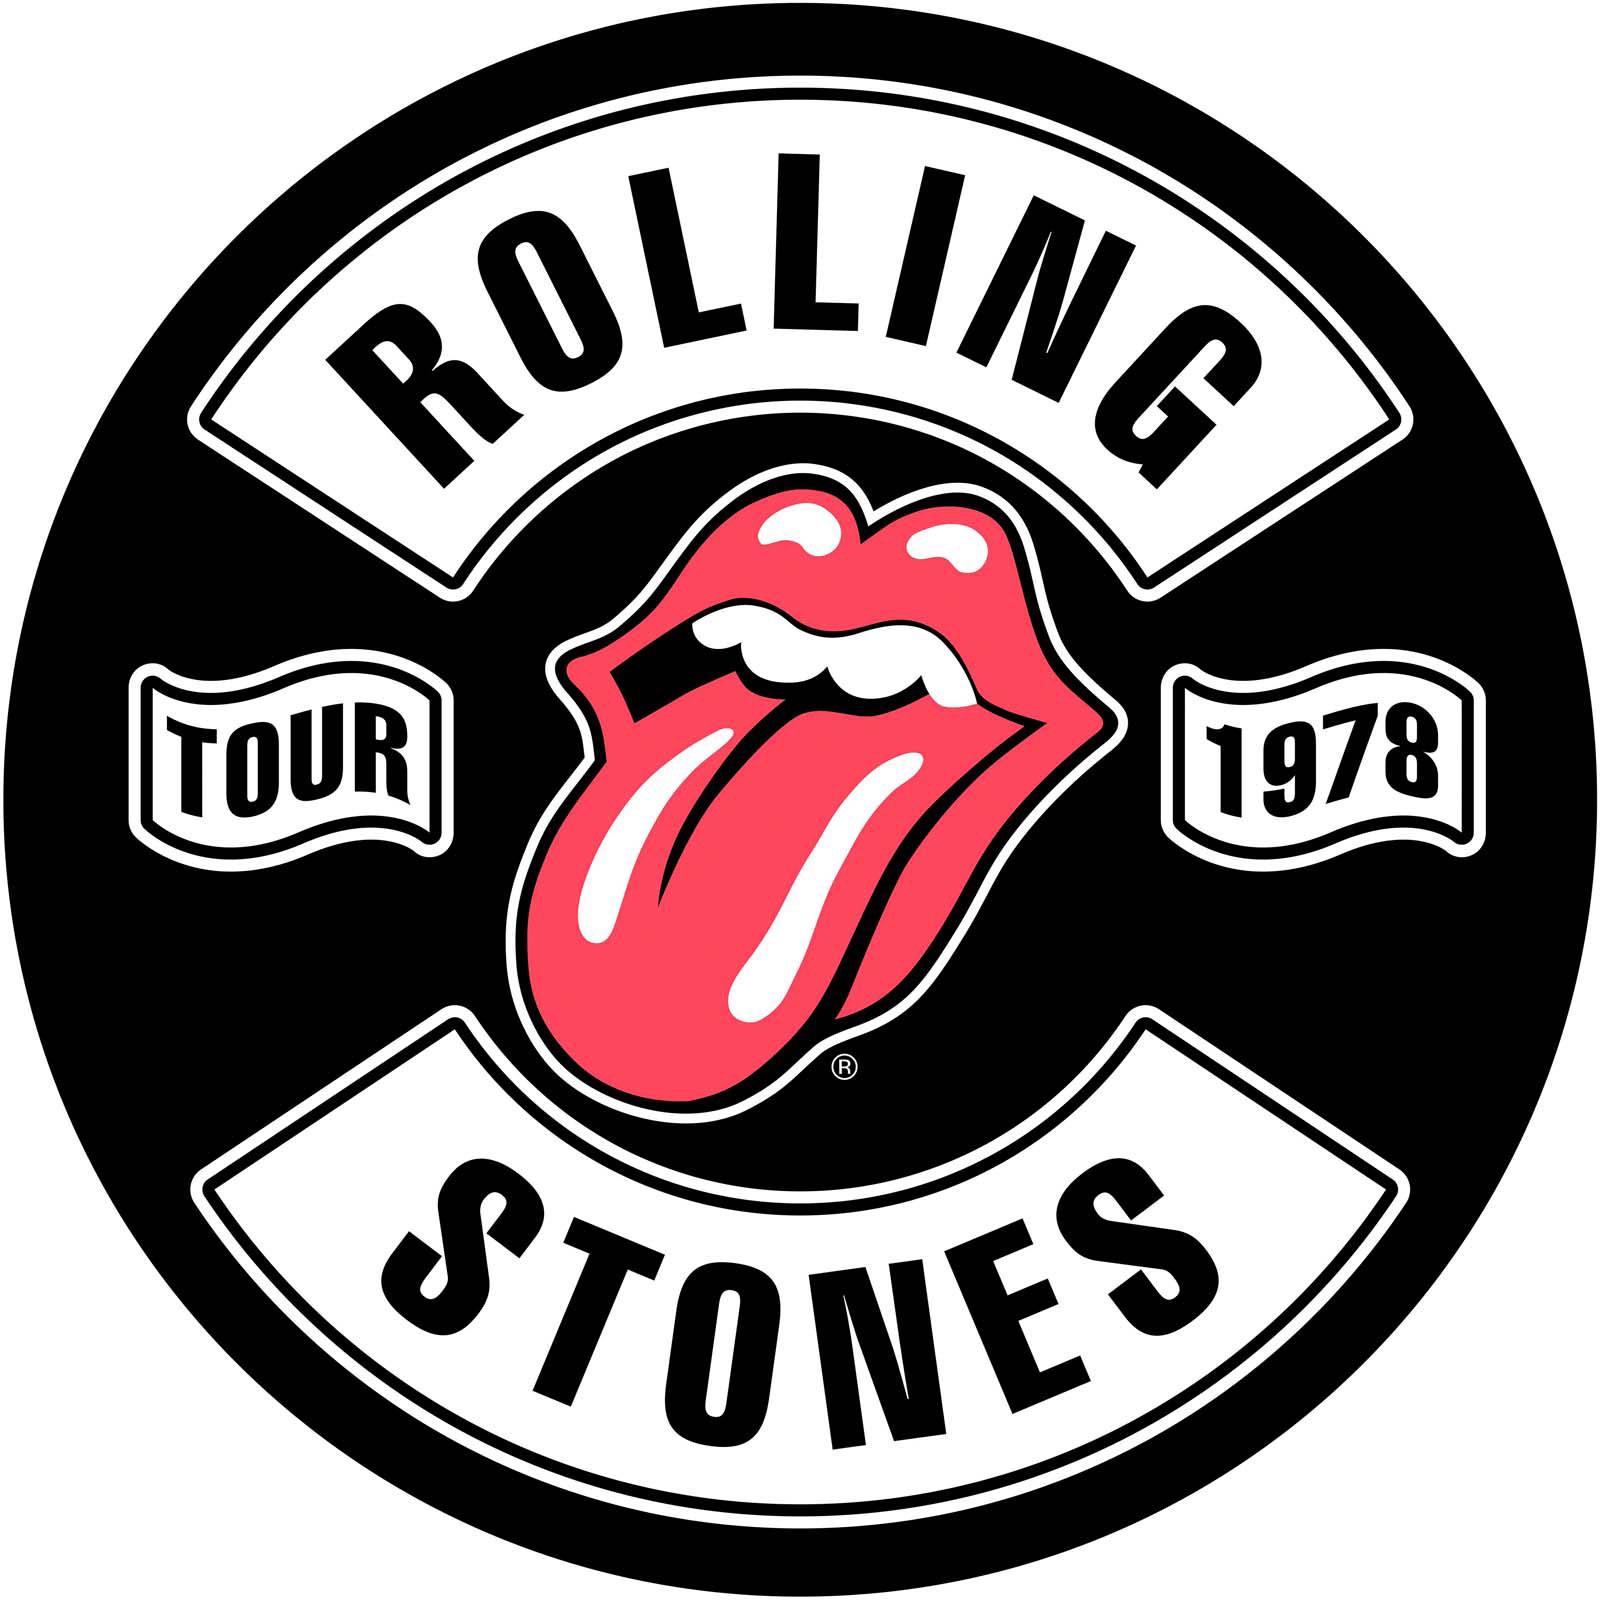 THE ROLLING STONES Tour 1978